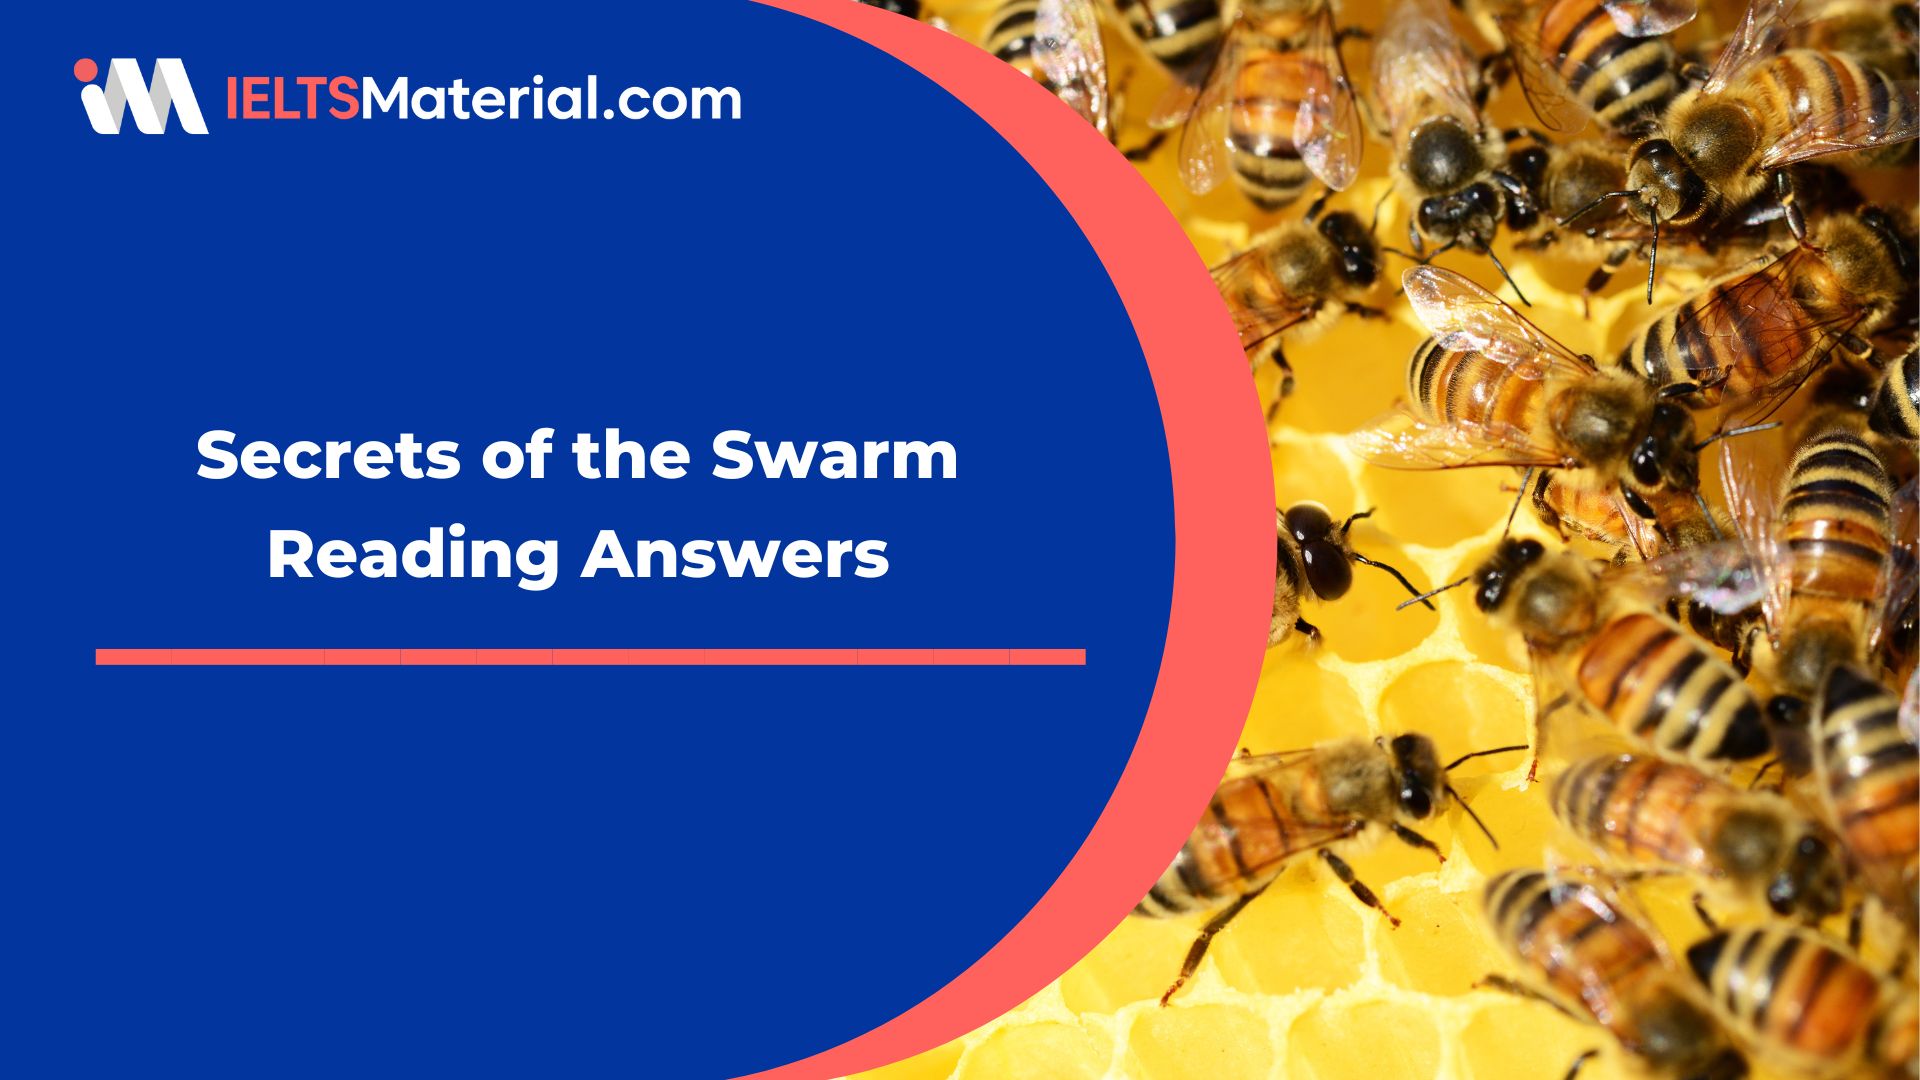 Secrets of the Swarm Reading Answers